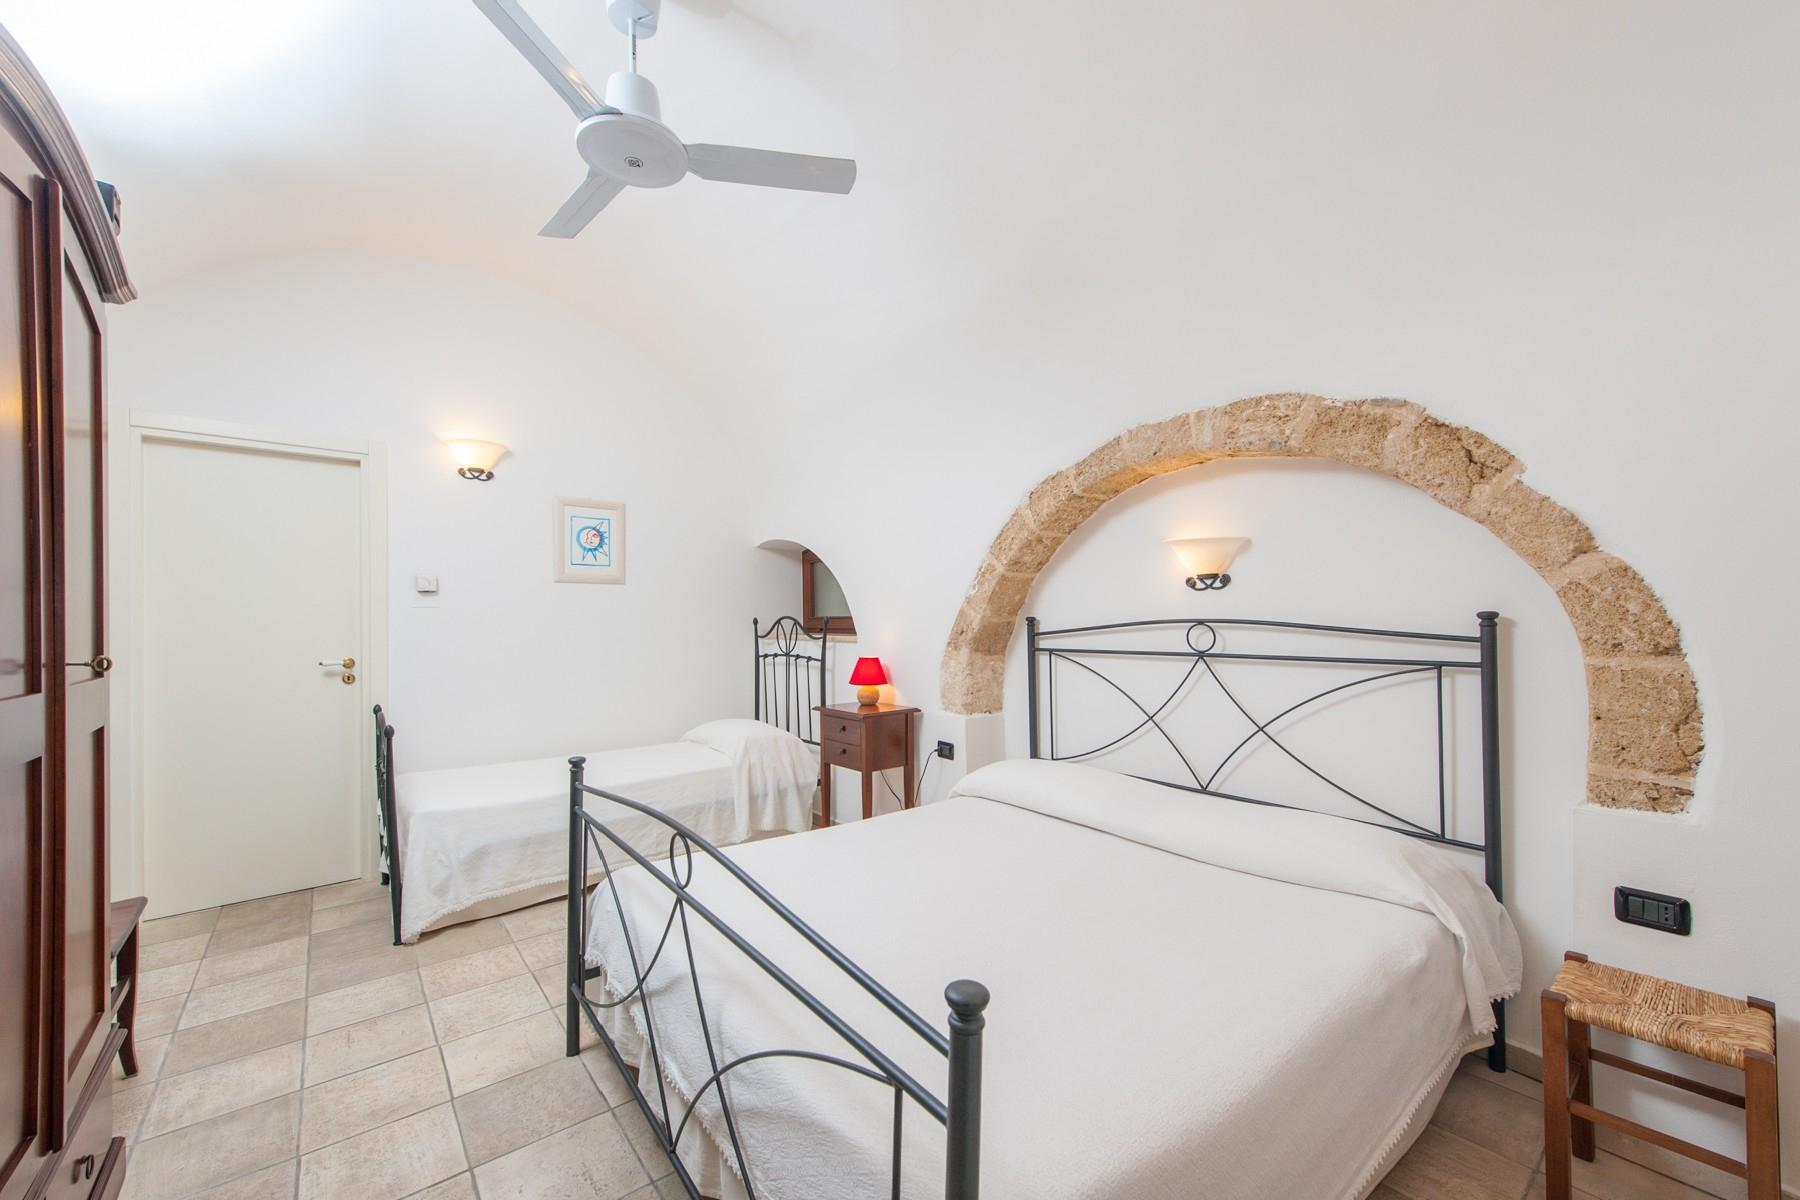 Perfectly renovated Palazzetto in the historic center of Parabita - 15